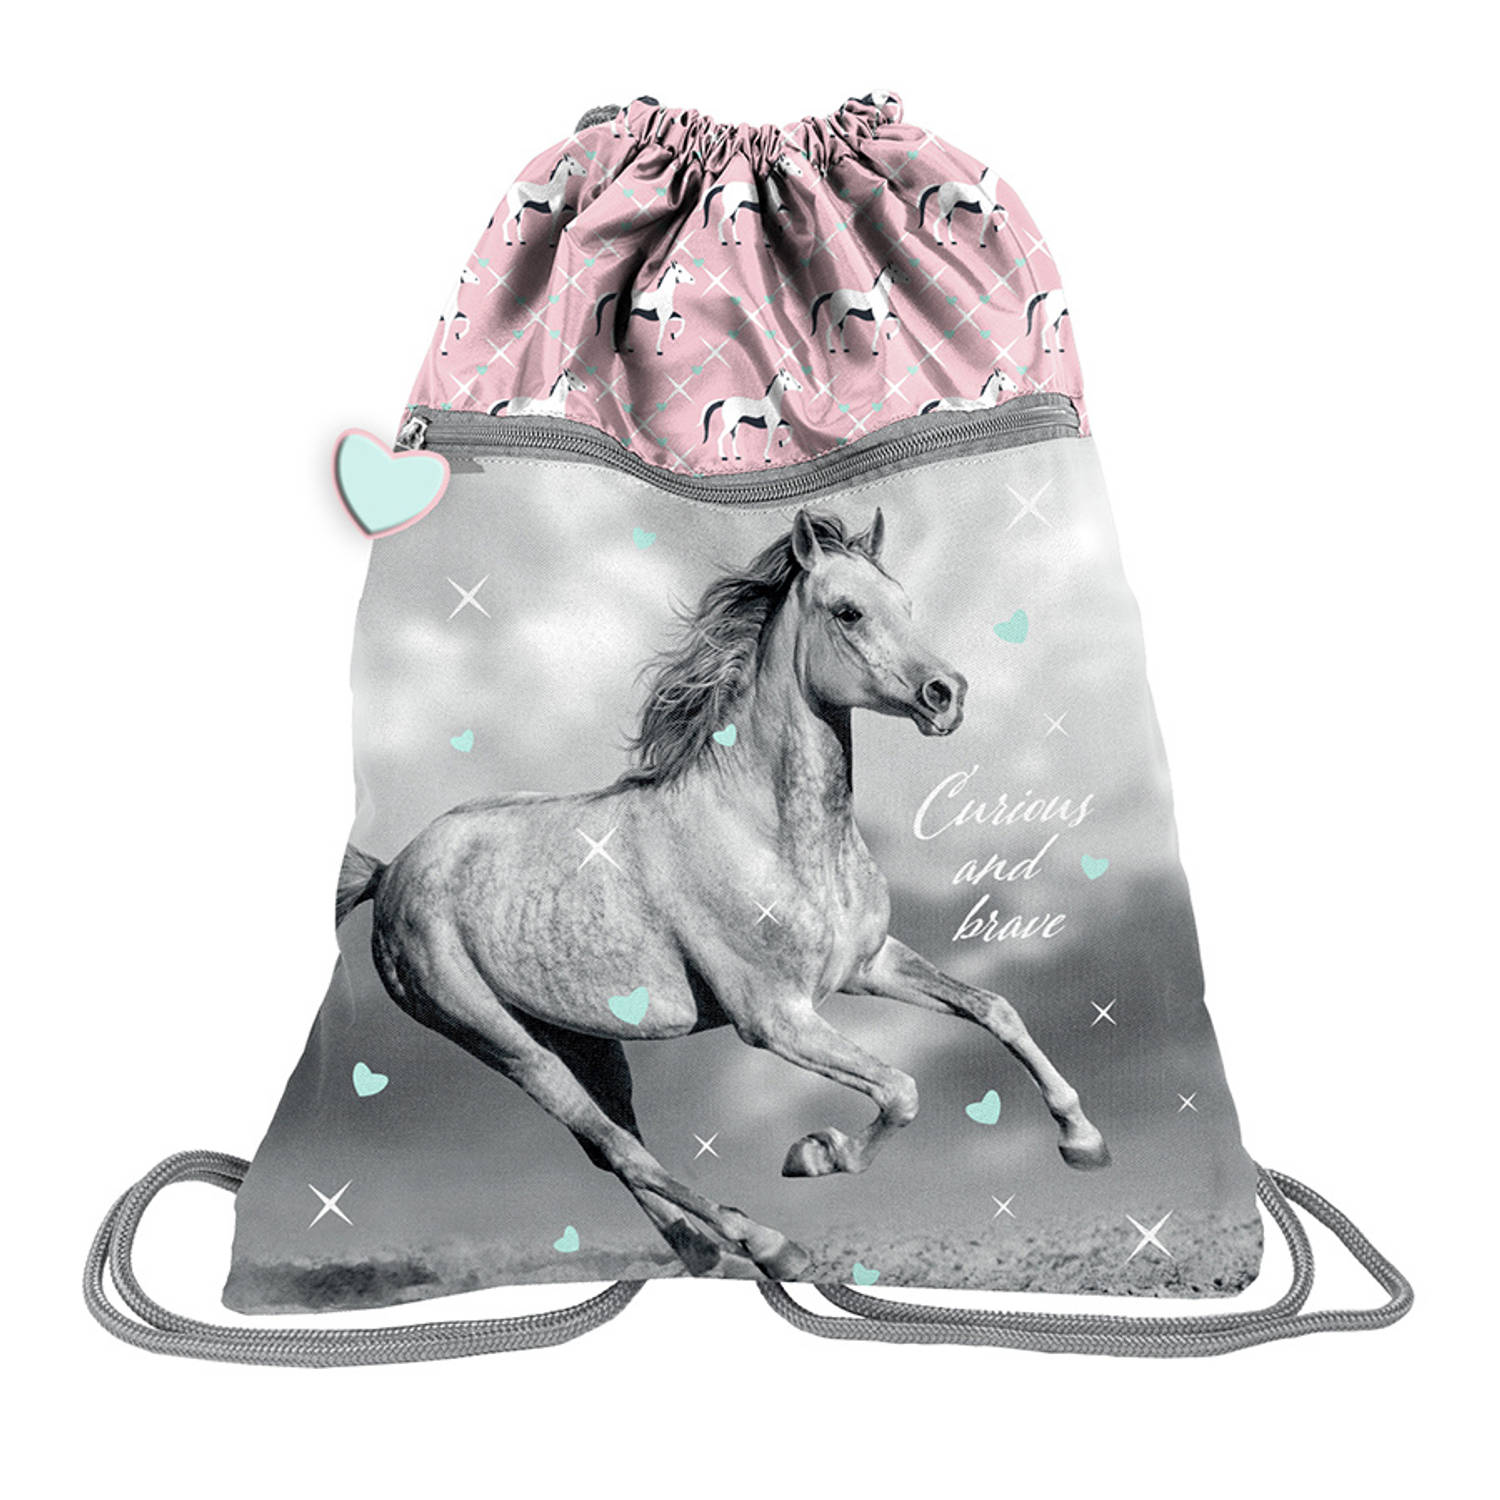 Animal Pictures Gymbag, Brave 46 x 27 cm Polyester